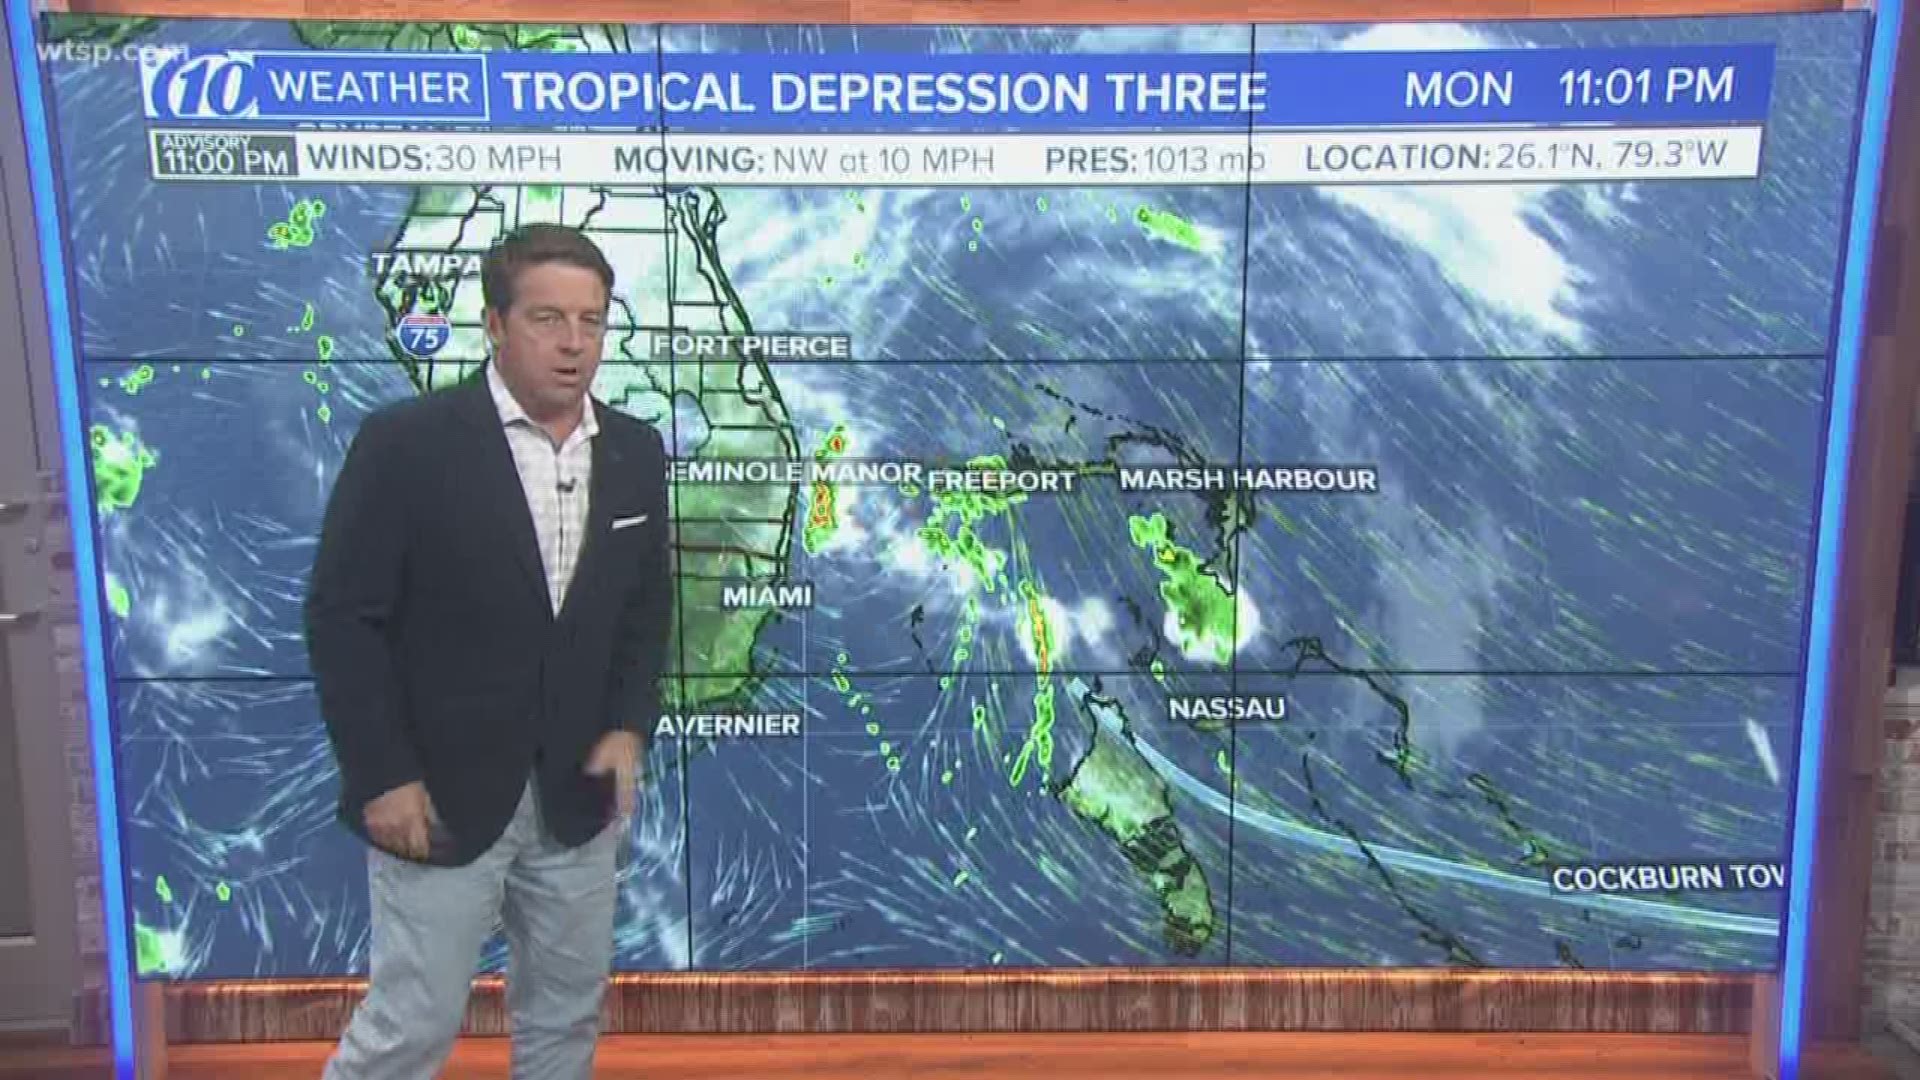 The National Hurricane Center and the 10Weather team are watching a depression forecast to move closer to the Florida coast.